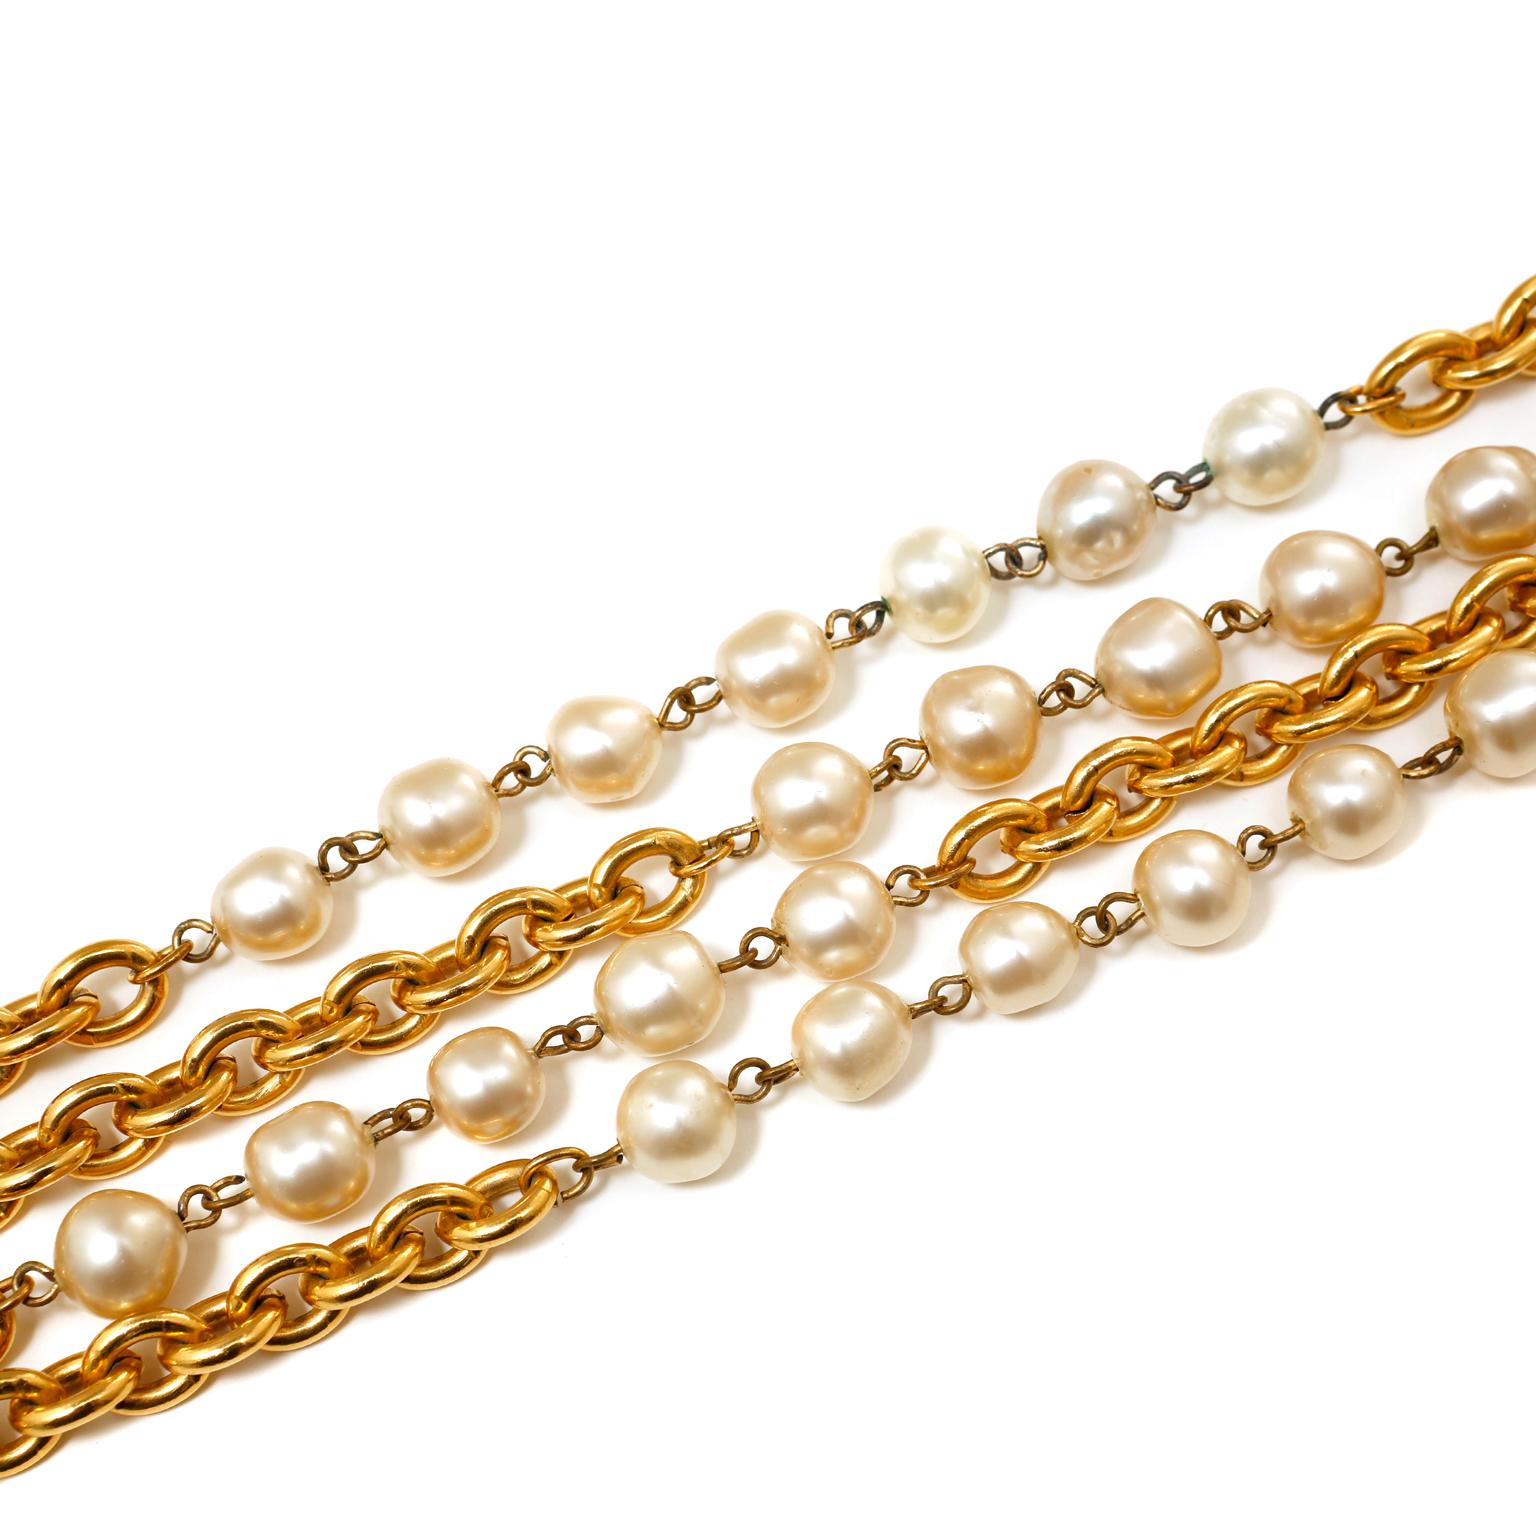 This authentic Chanel Double Chain Pearl Station Necklace is in excellent vintage condition from the 1980's.  24 karat gold plated link chains have dramatically long length.  Accented with groupings of irregularly shaped faux pearls.  Measures